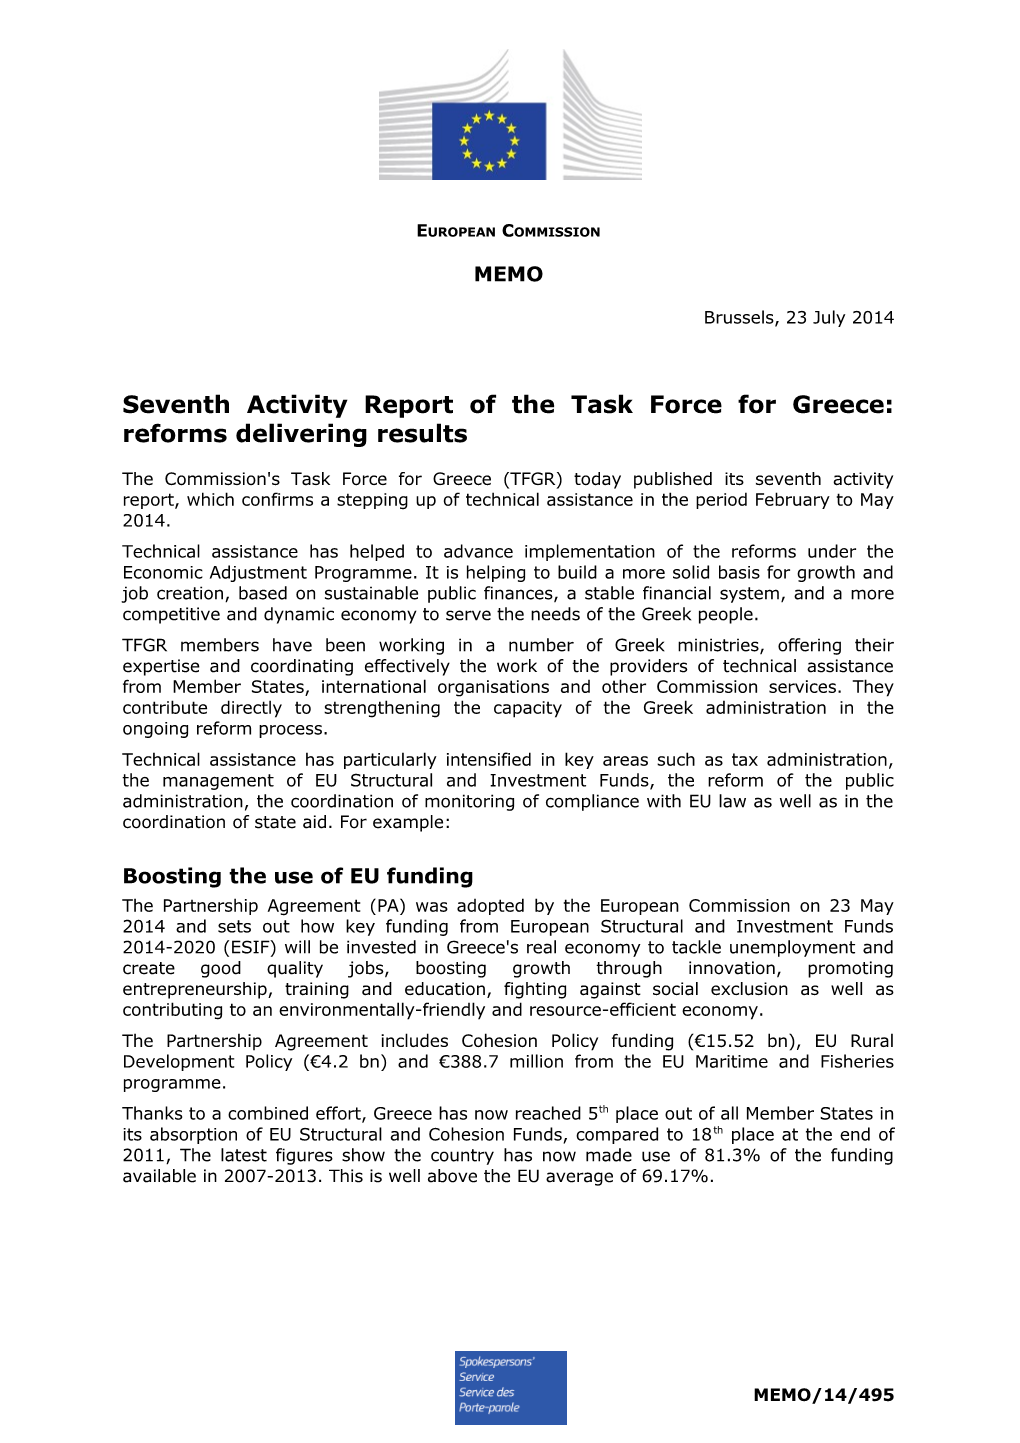 Seventh Activity Report of the Task Force for Greece: Reforms Delivering Results